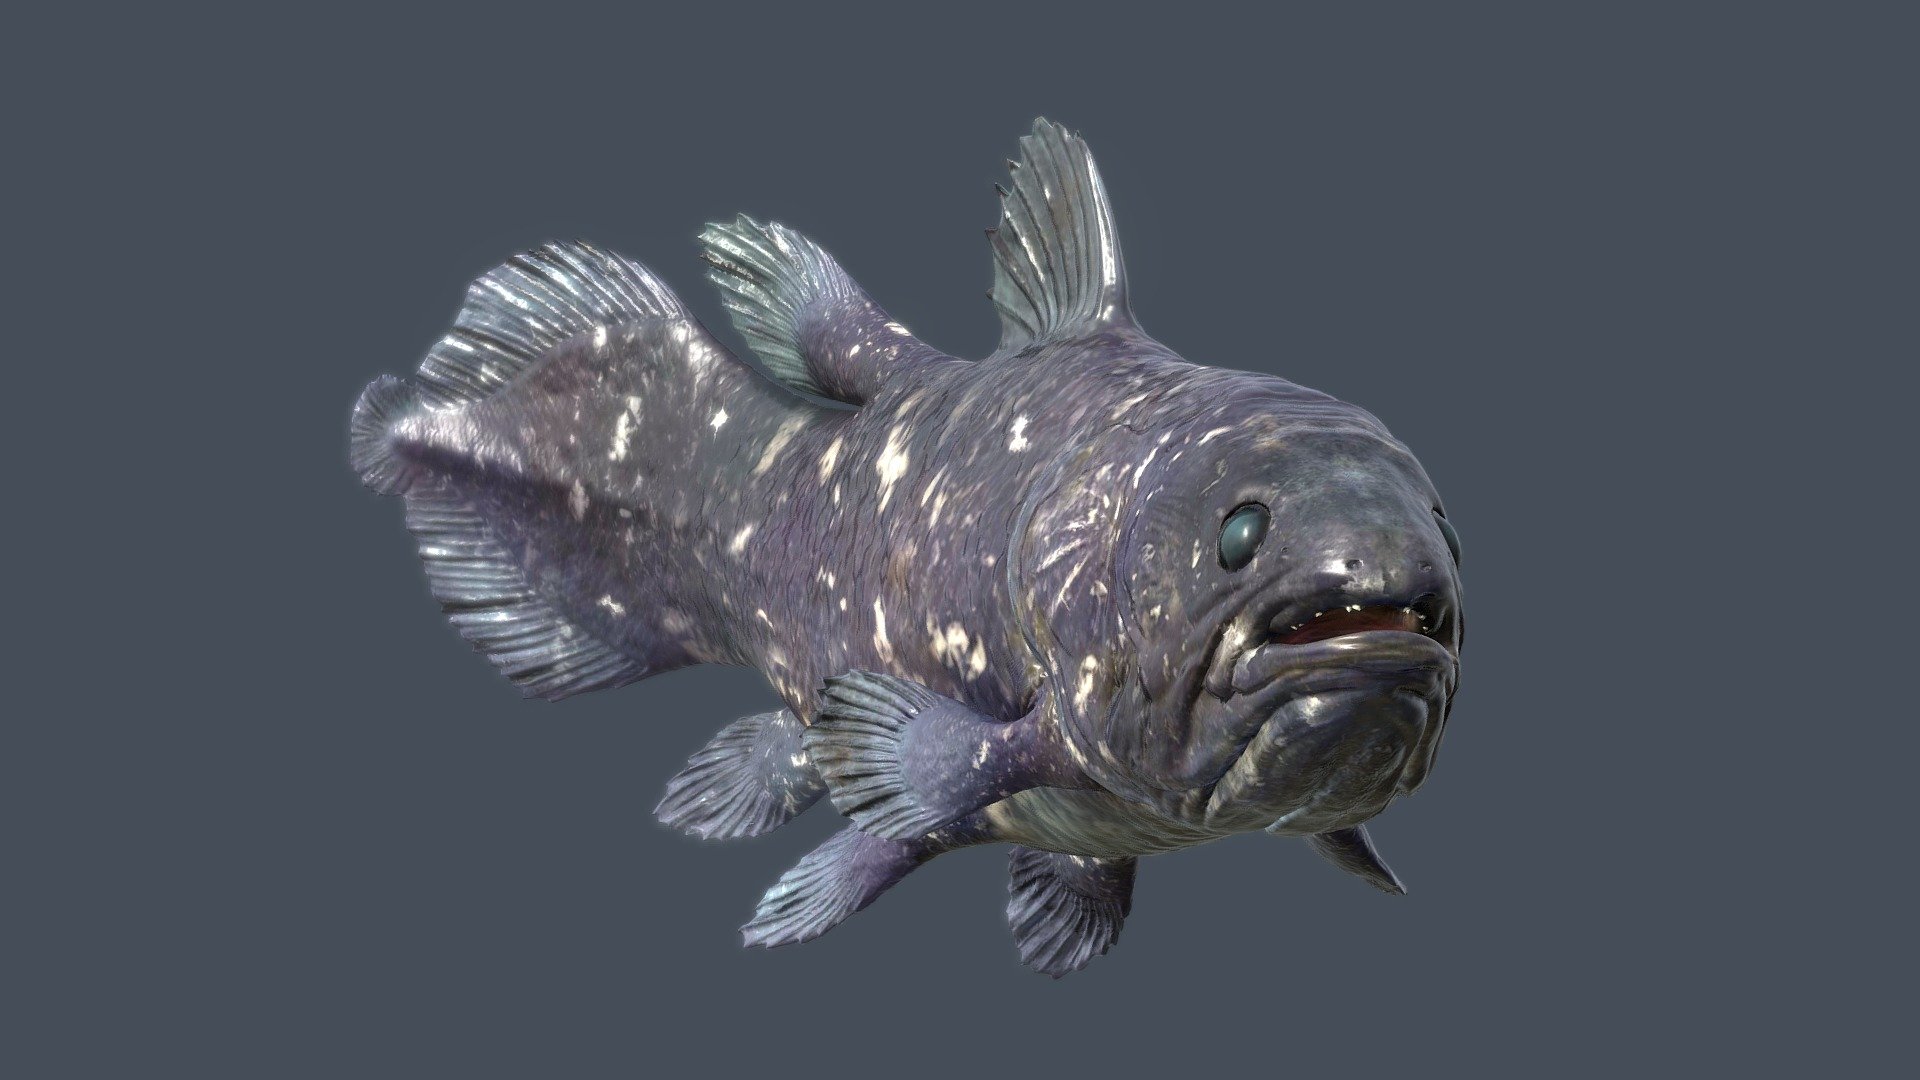 coelacanth, (genus Latimeria), any of the two living lobe-finned bony fishes of the genus Latimeria. The modern coelacanths are bigger than most fossil coelacanths and are powerful predators with heavy mucilaginous bodies and highly mobile limblike fins. They average 5 feet (1.5 metres) in length and weigh about 100 pounds (45 kg). Coelacanths are slow-growing and long-lived; studies of growth rings in the scales of African coelacanths suggest that these fishes become sexually mature when they are between 40 and 69 years old and may live as long as 100 years. They are live-bearers that give birth to well-developed young. One study reports that female African coelacanths carry their young about five years before giving birth. Though once thought to be deepwater fishes, coelacanths are now known to inhabit mesopelagic waters, below the continental shelf, at depths of some 650–1,300 feet (200–400 metres) 3d model